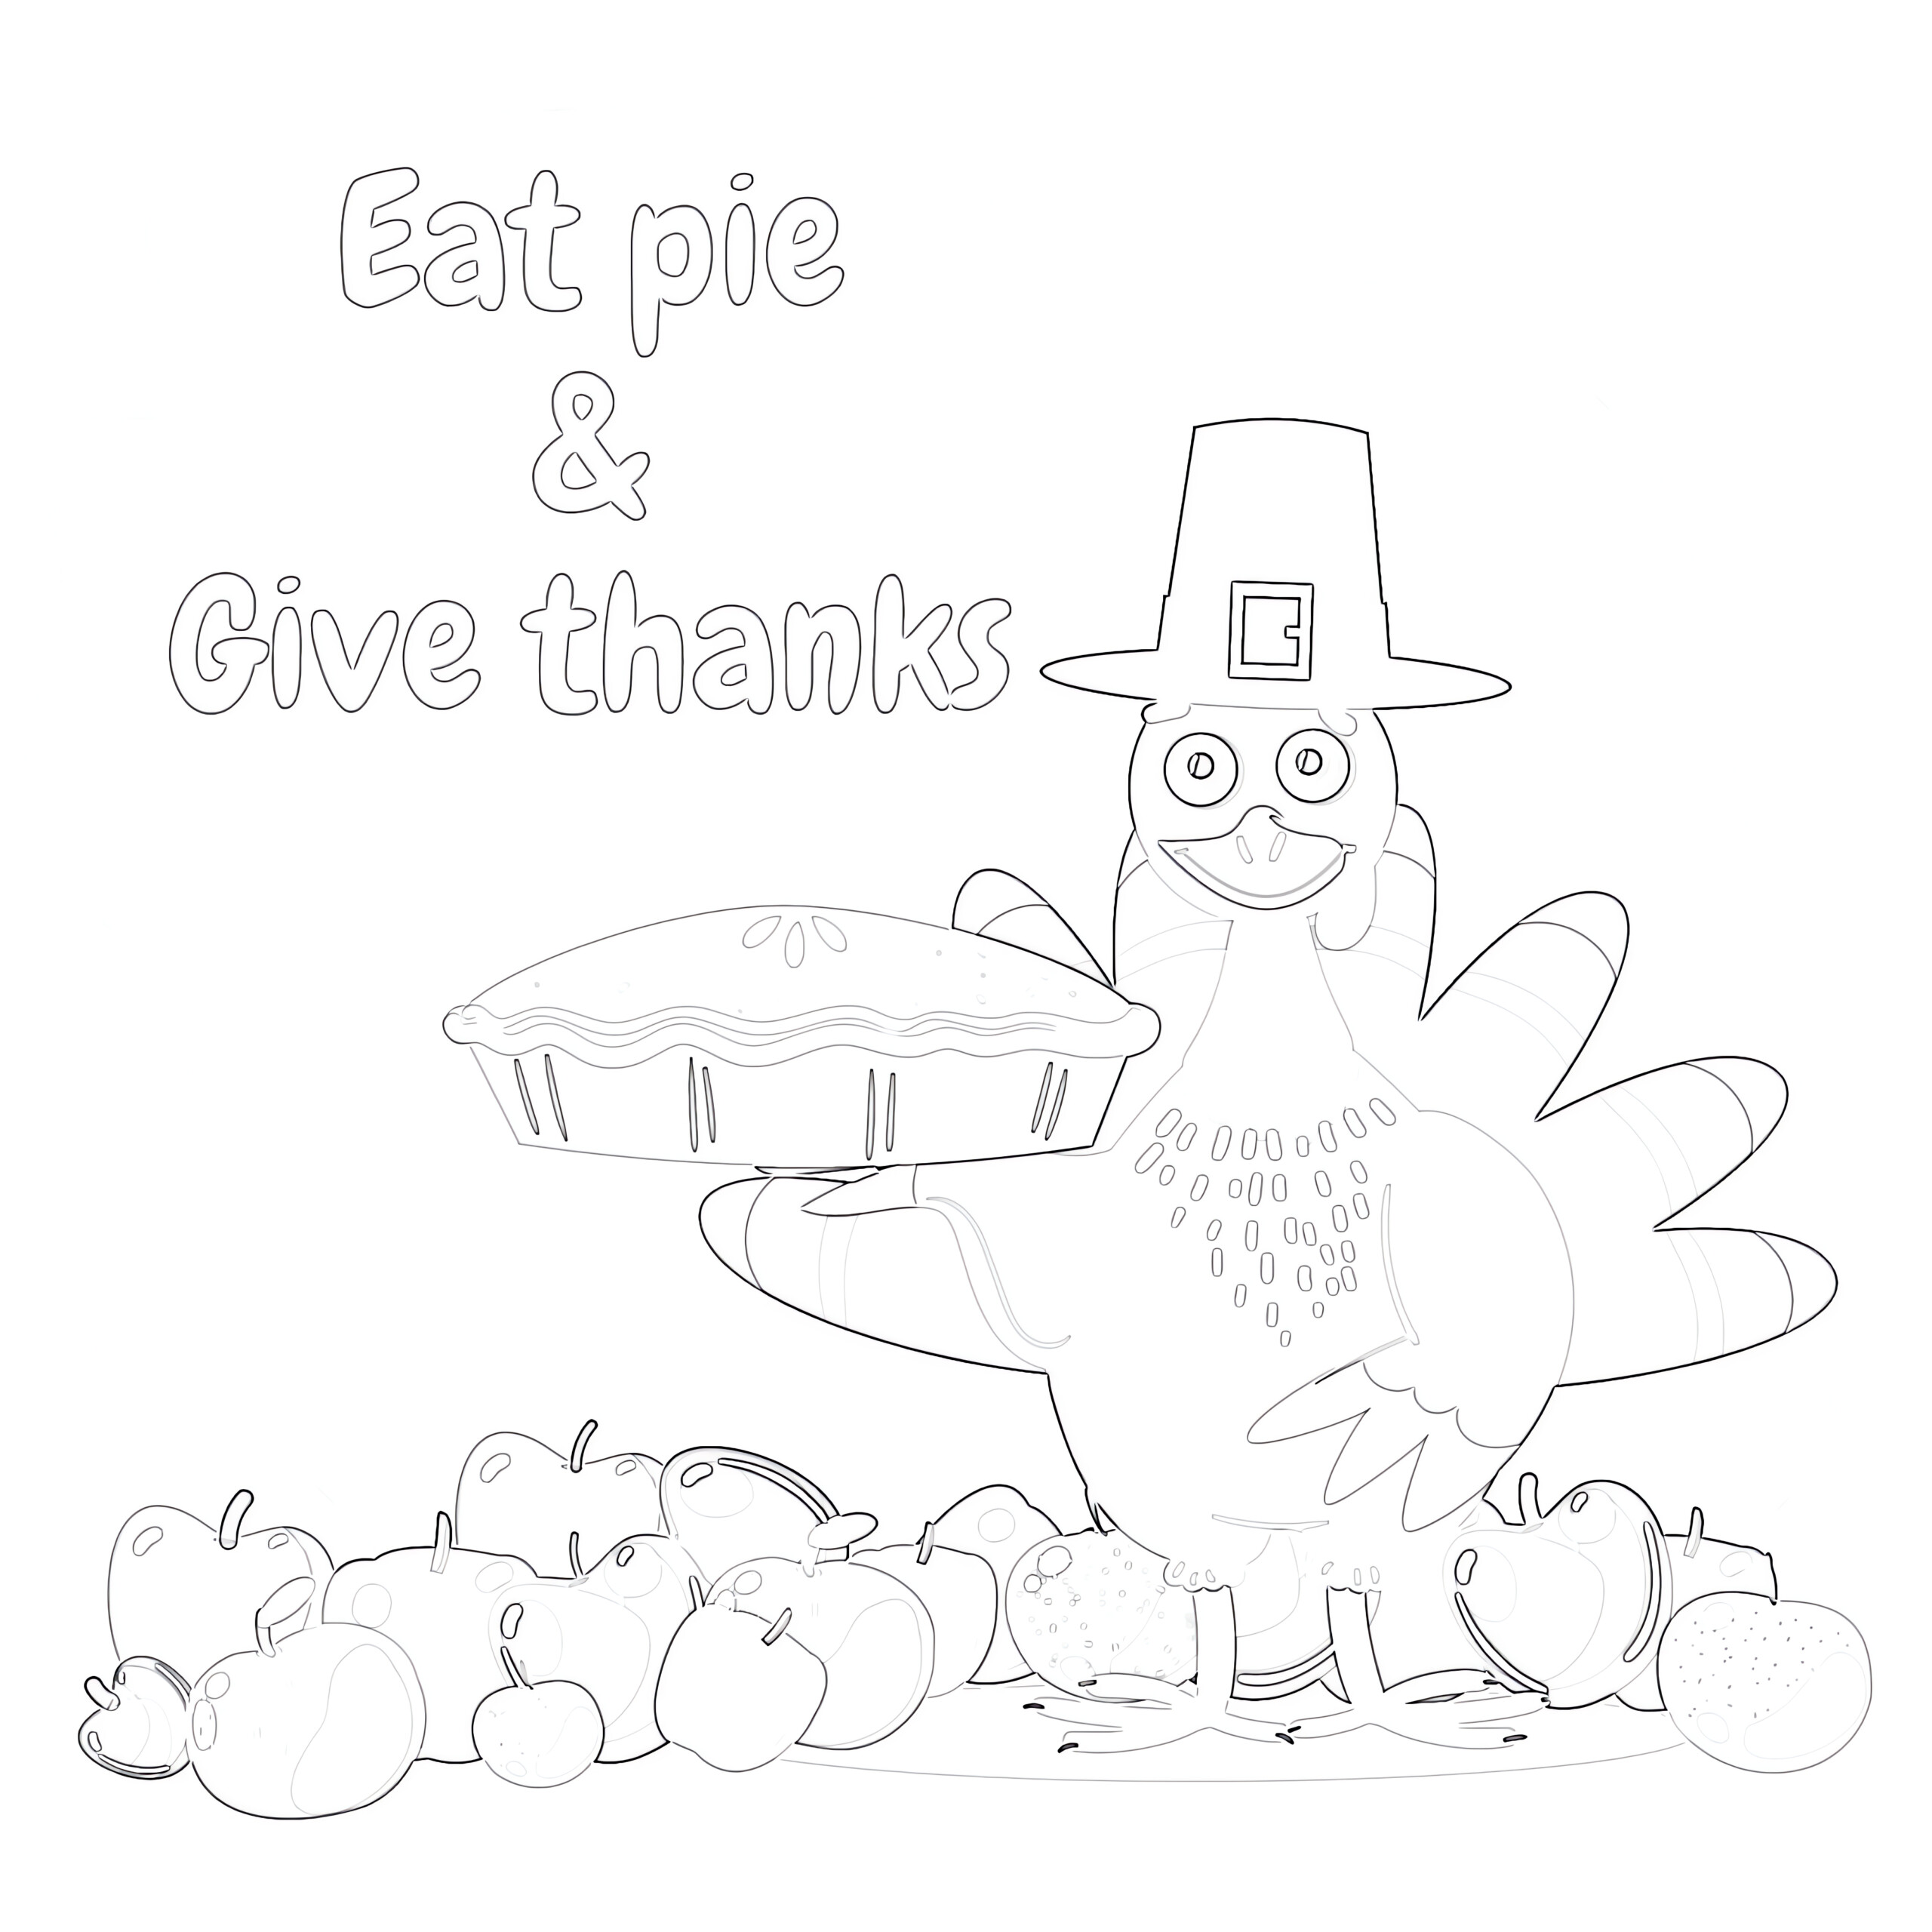 Eat Pie And Give Thanks - Coloring page